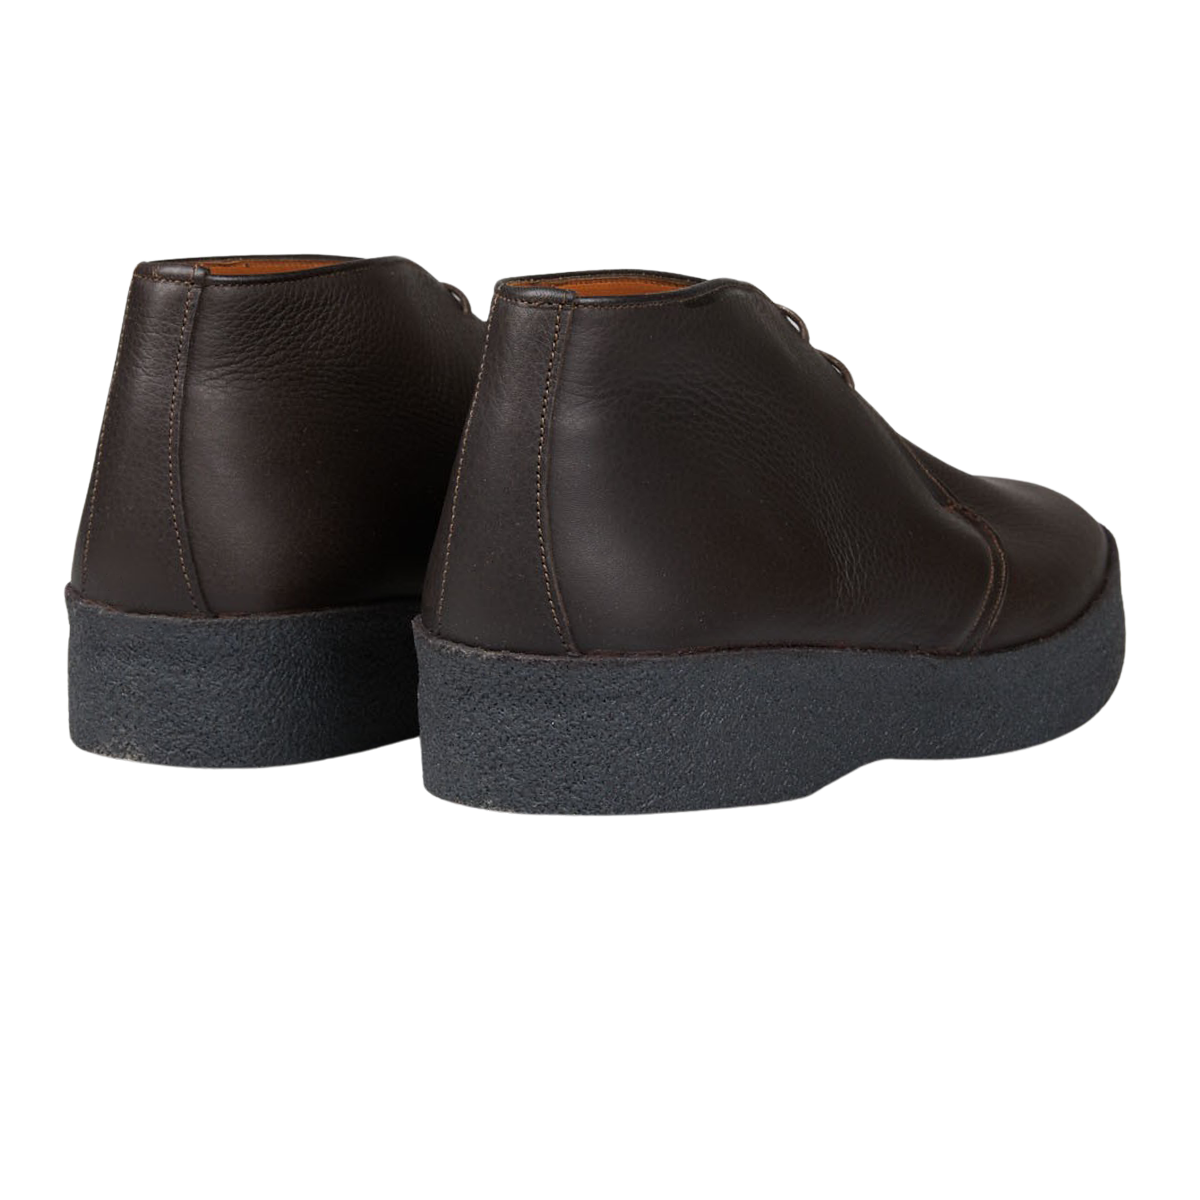 A pair of Sanders Dark Brown Savage Grain Hi Top Chukka Boots with a rubber sole.